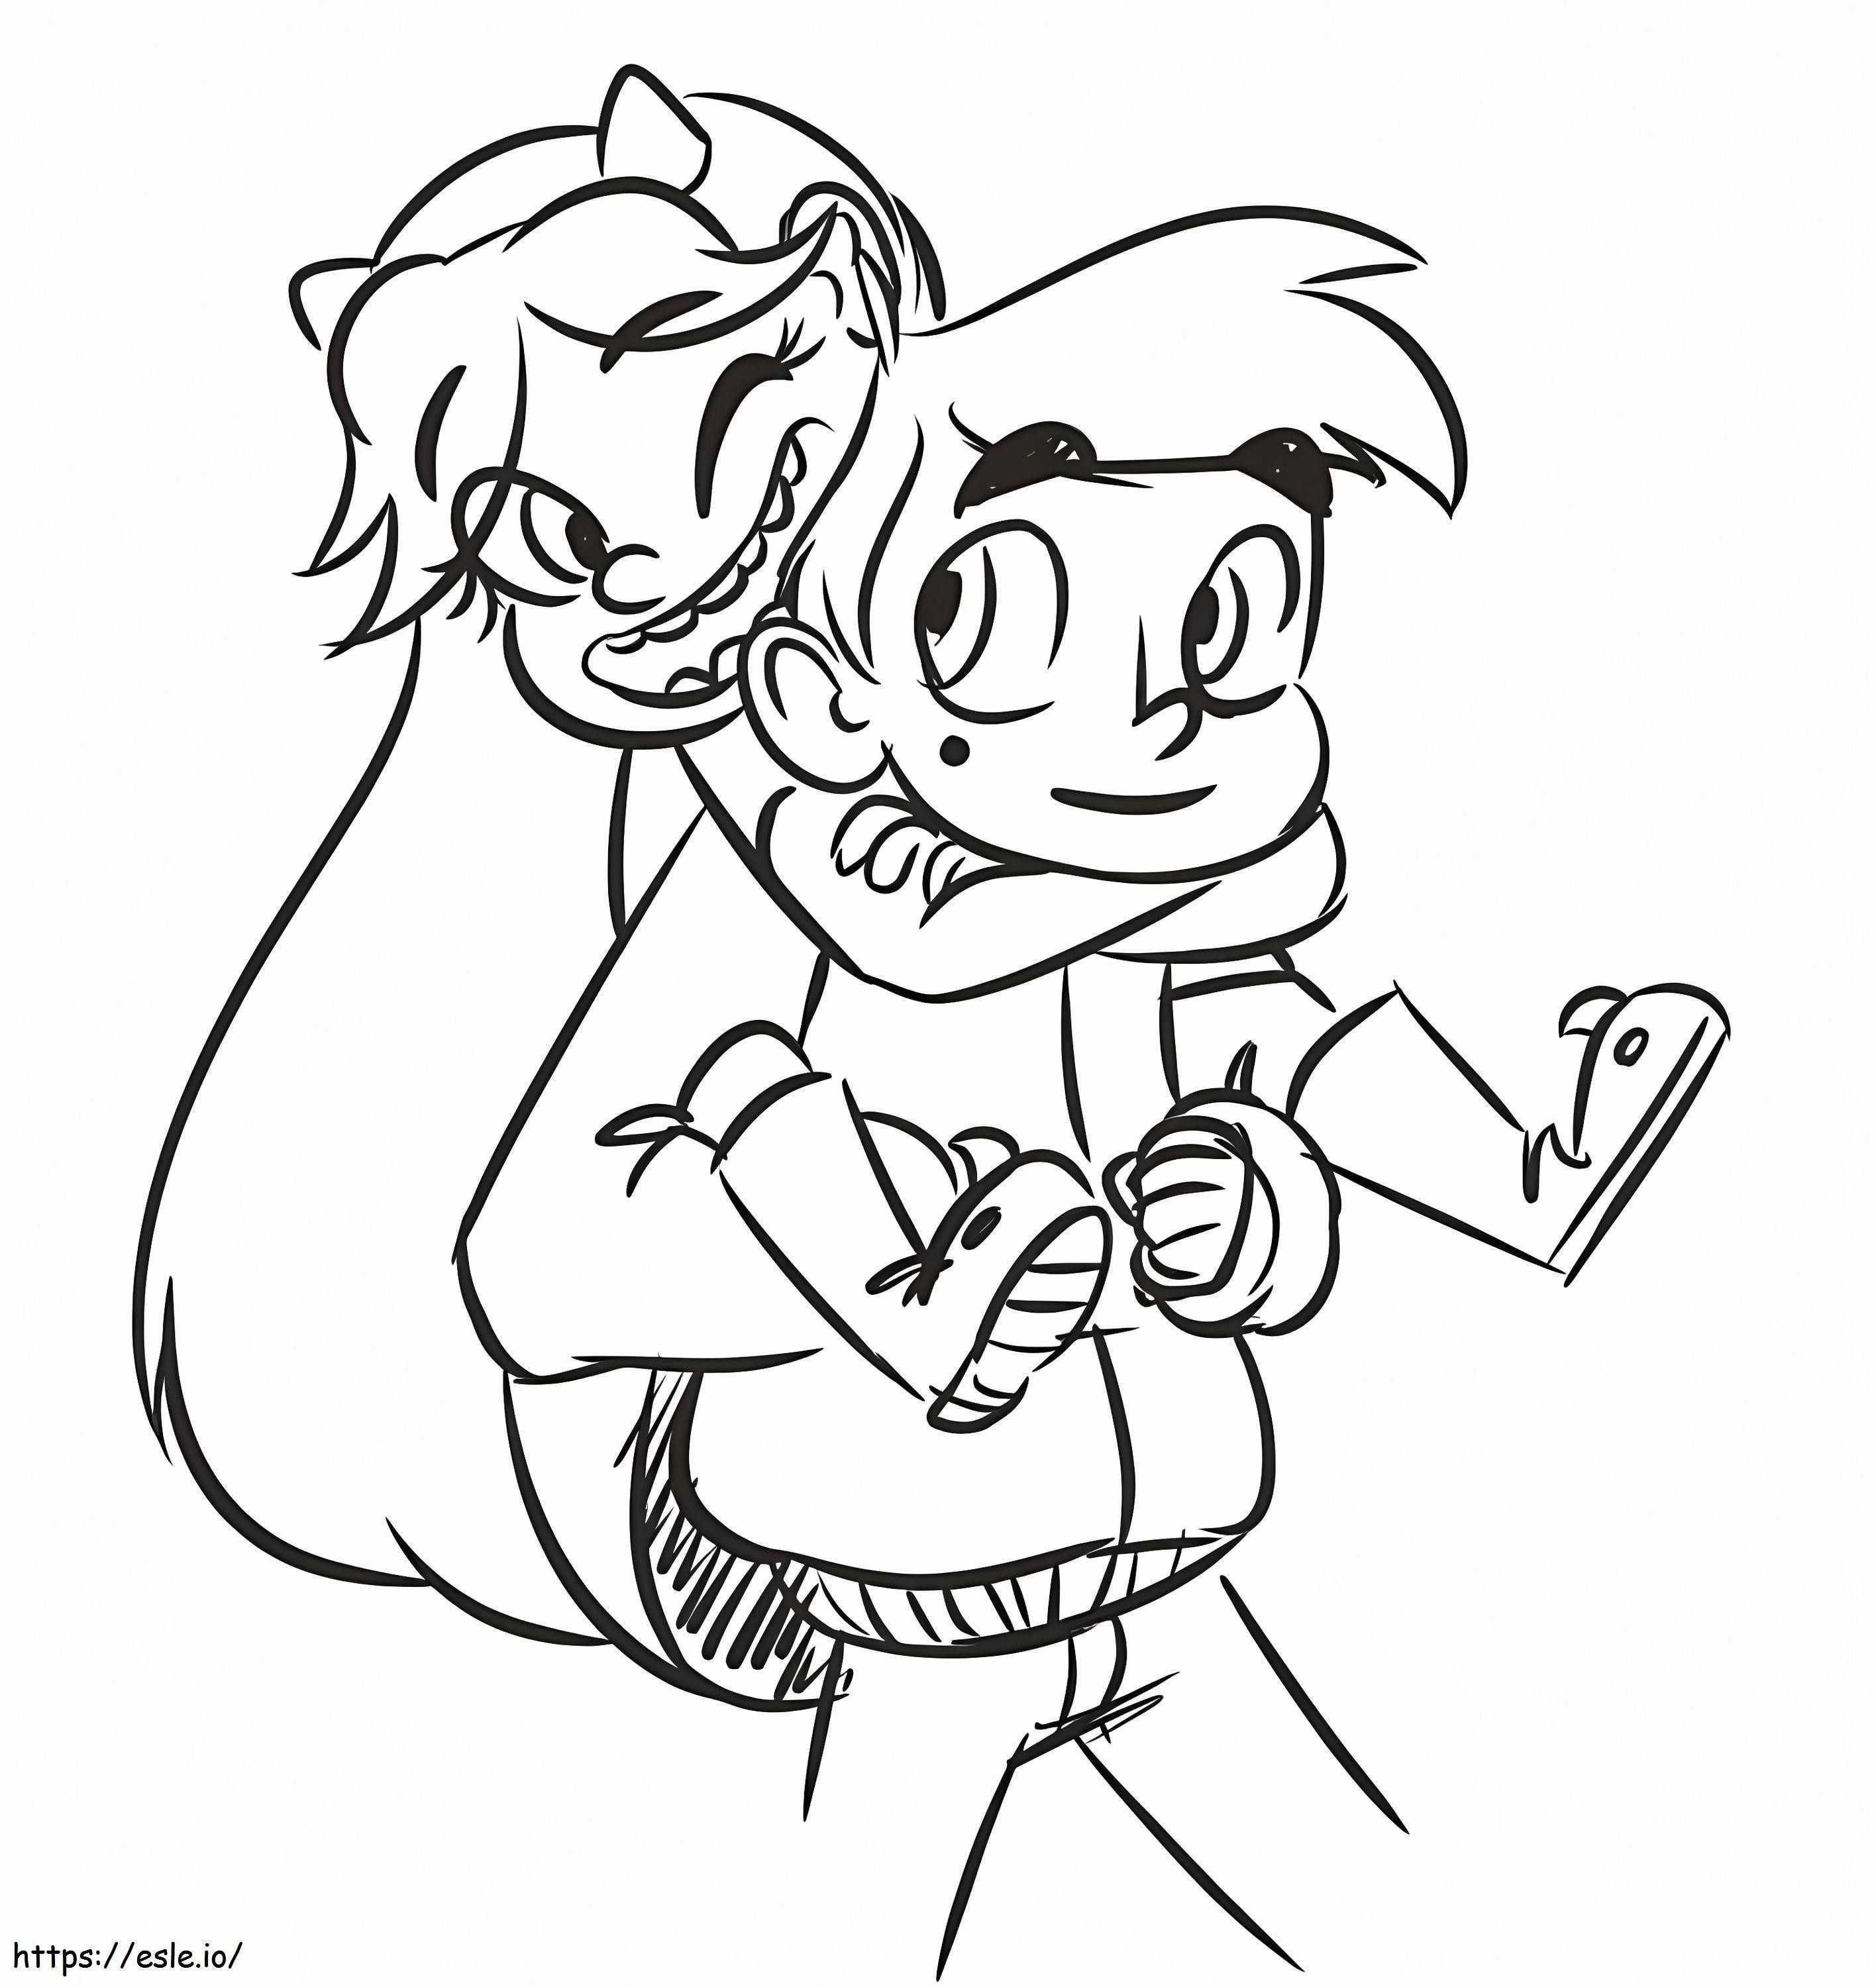 Lovely Star And Marco coloring page